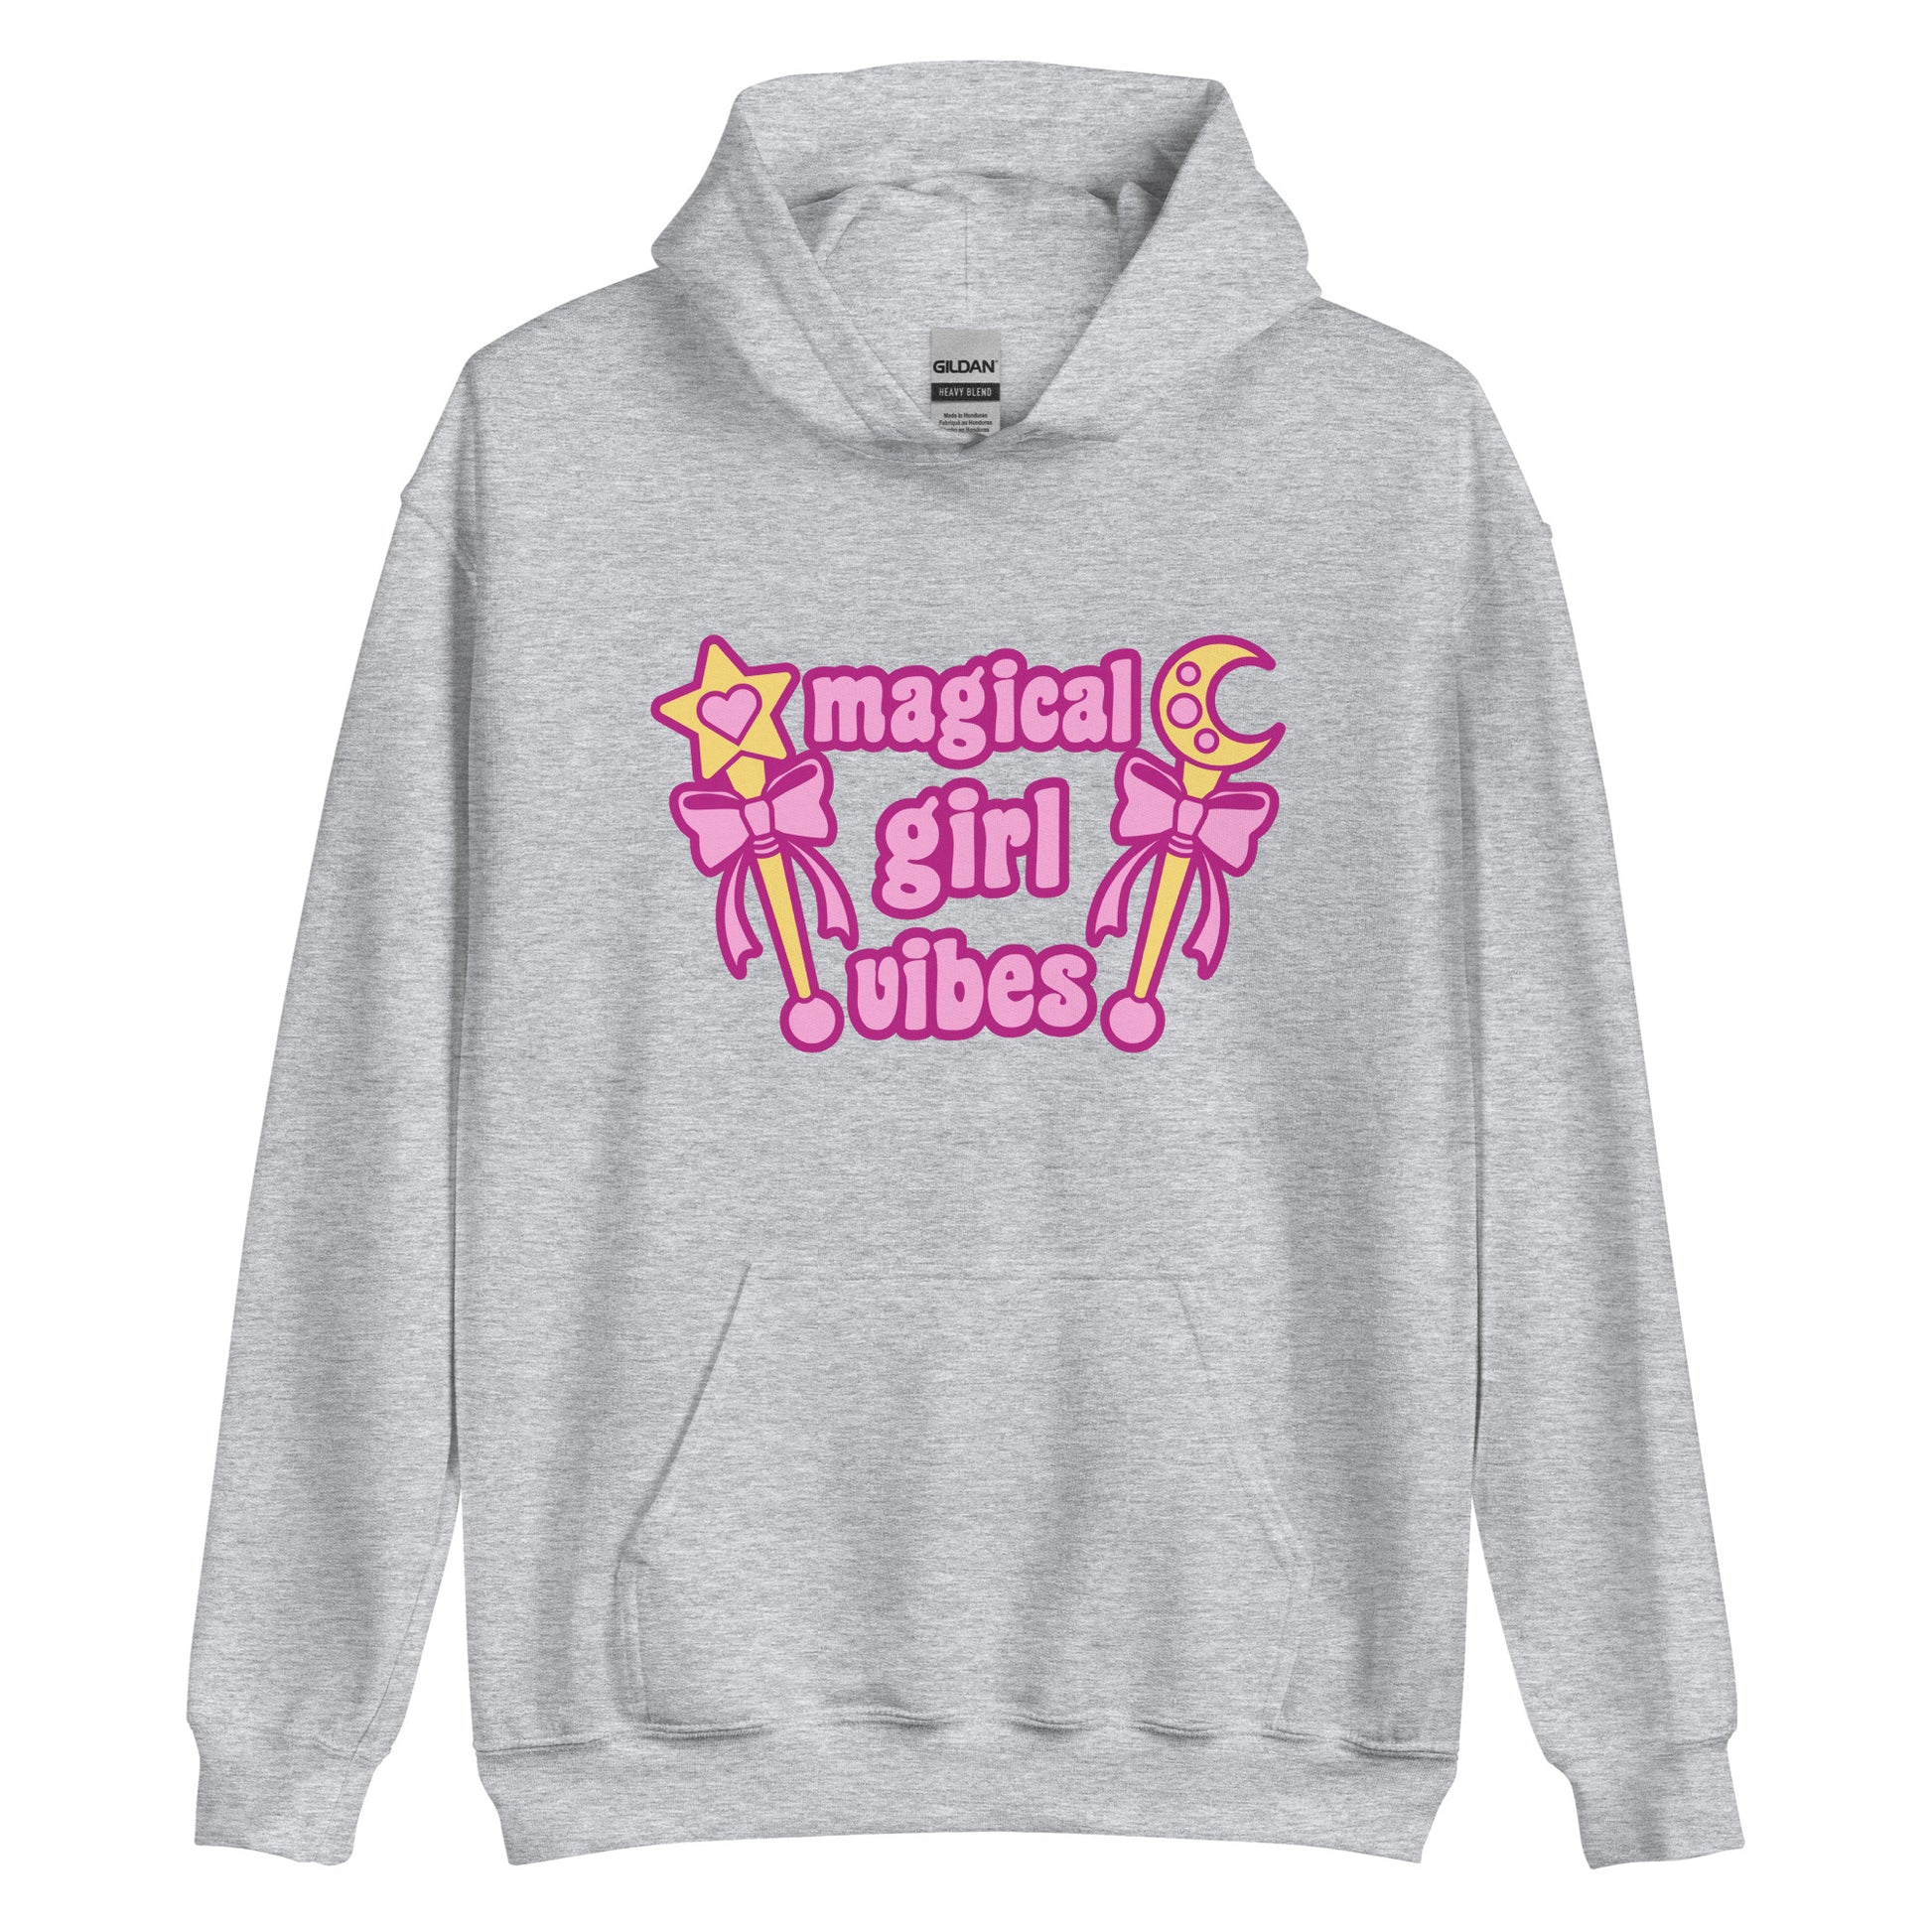 A heathered grey hooded sweatshirt featuring two gold wands with pink bows and pink text reading "Magical girl vibes"